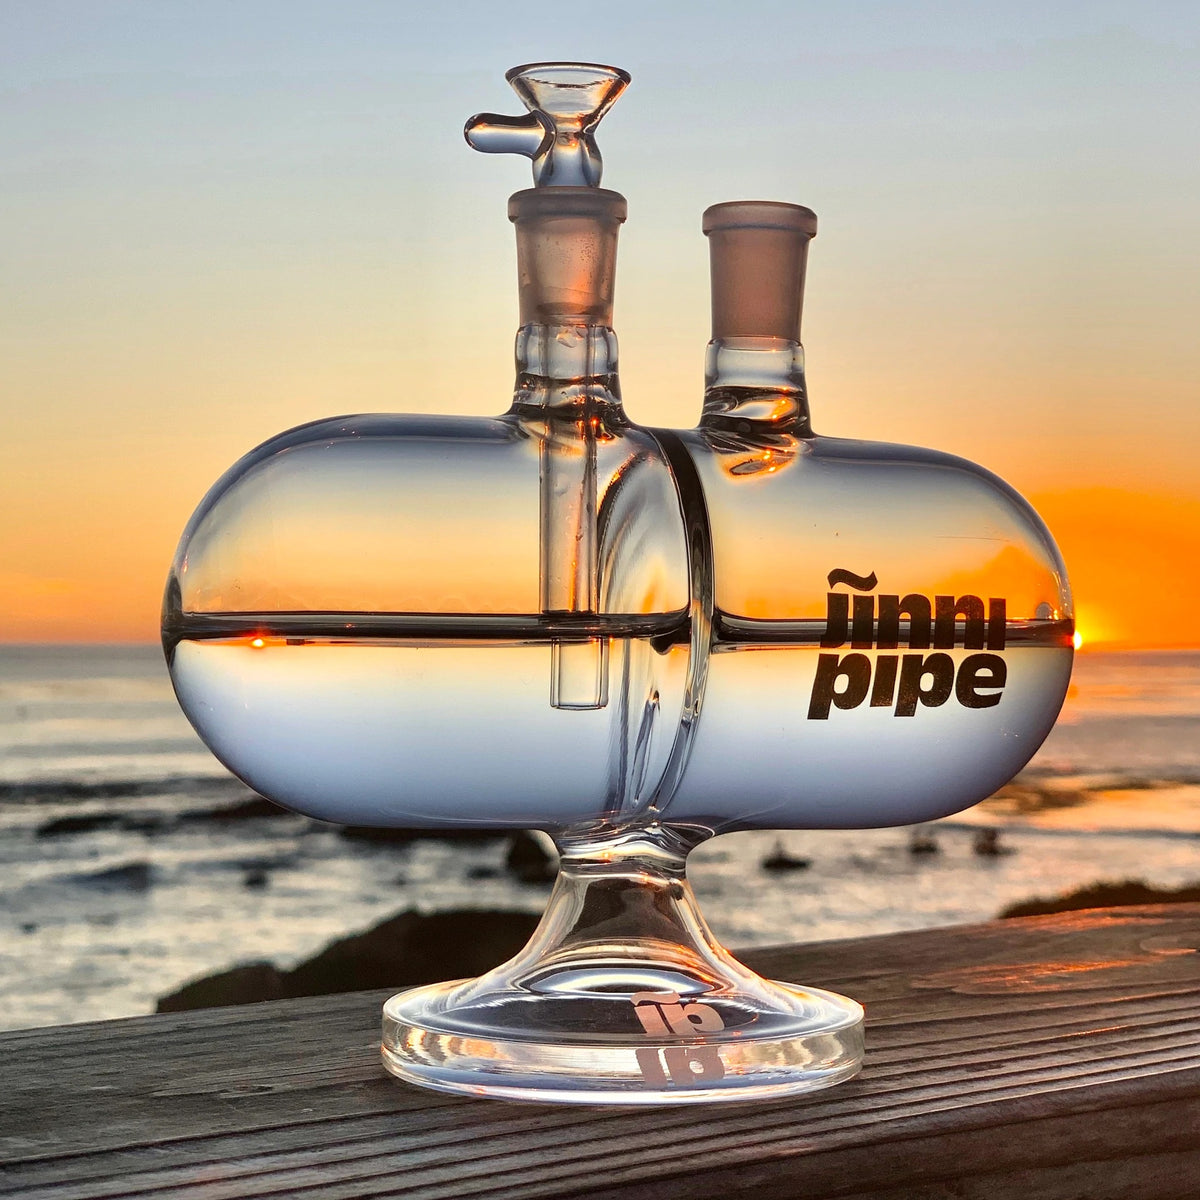 Jinni Pipe Gravity Water Pipe Gypsy Labs